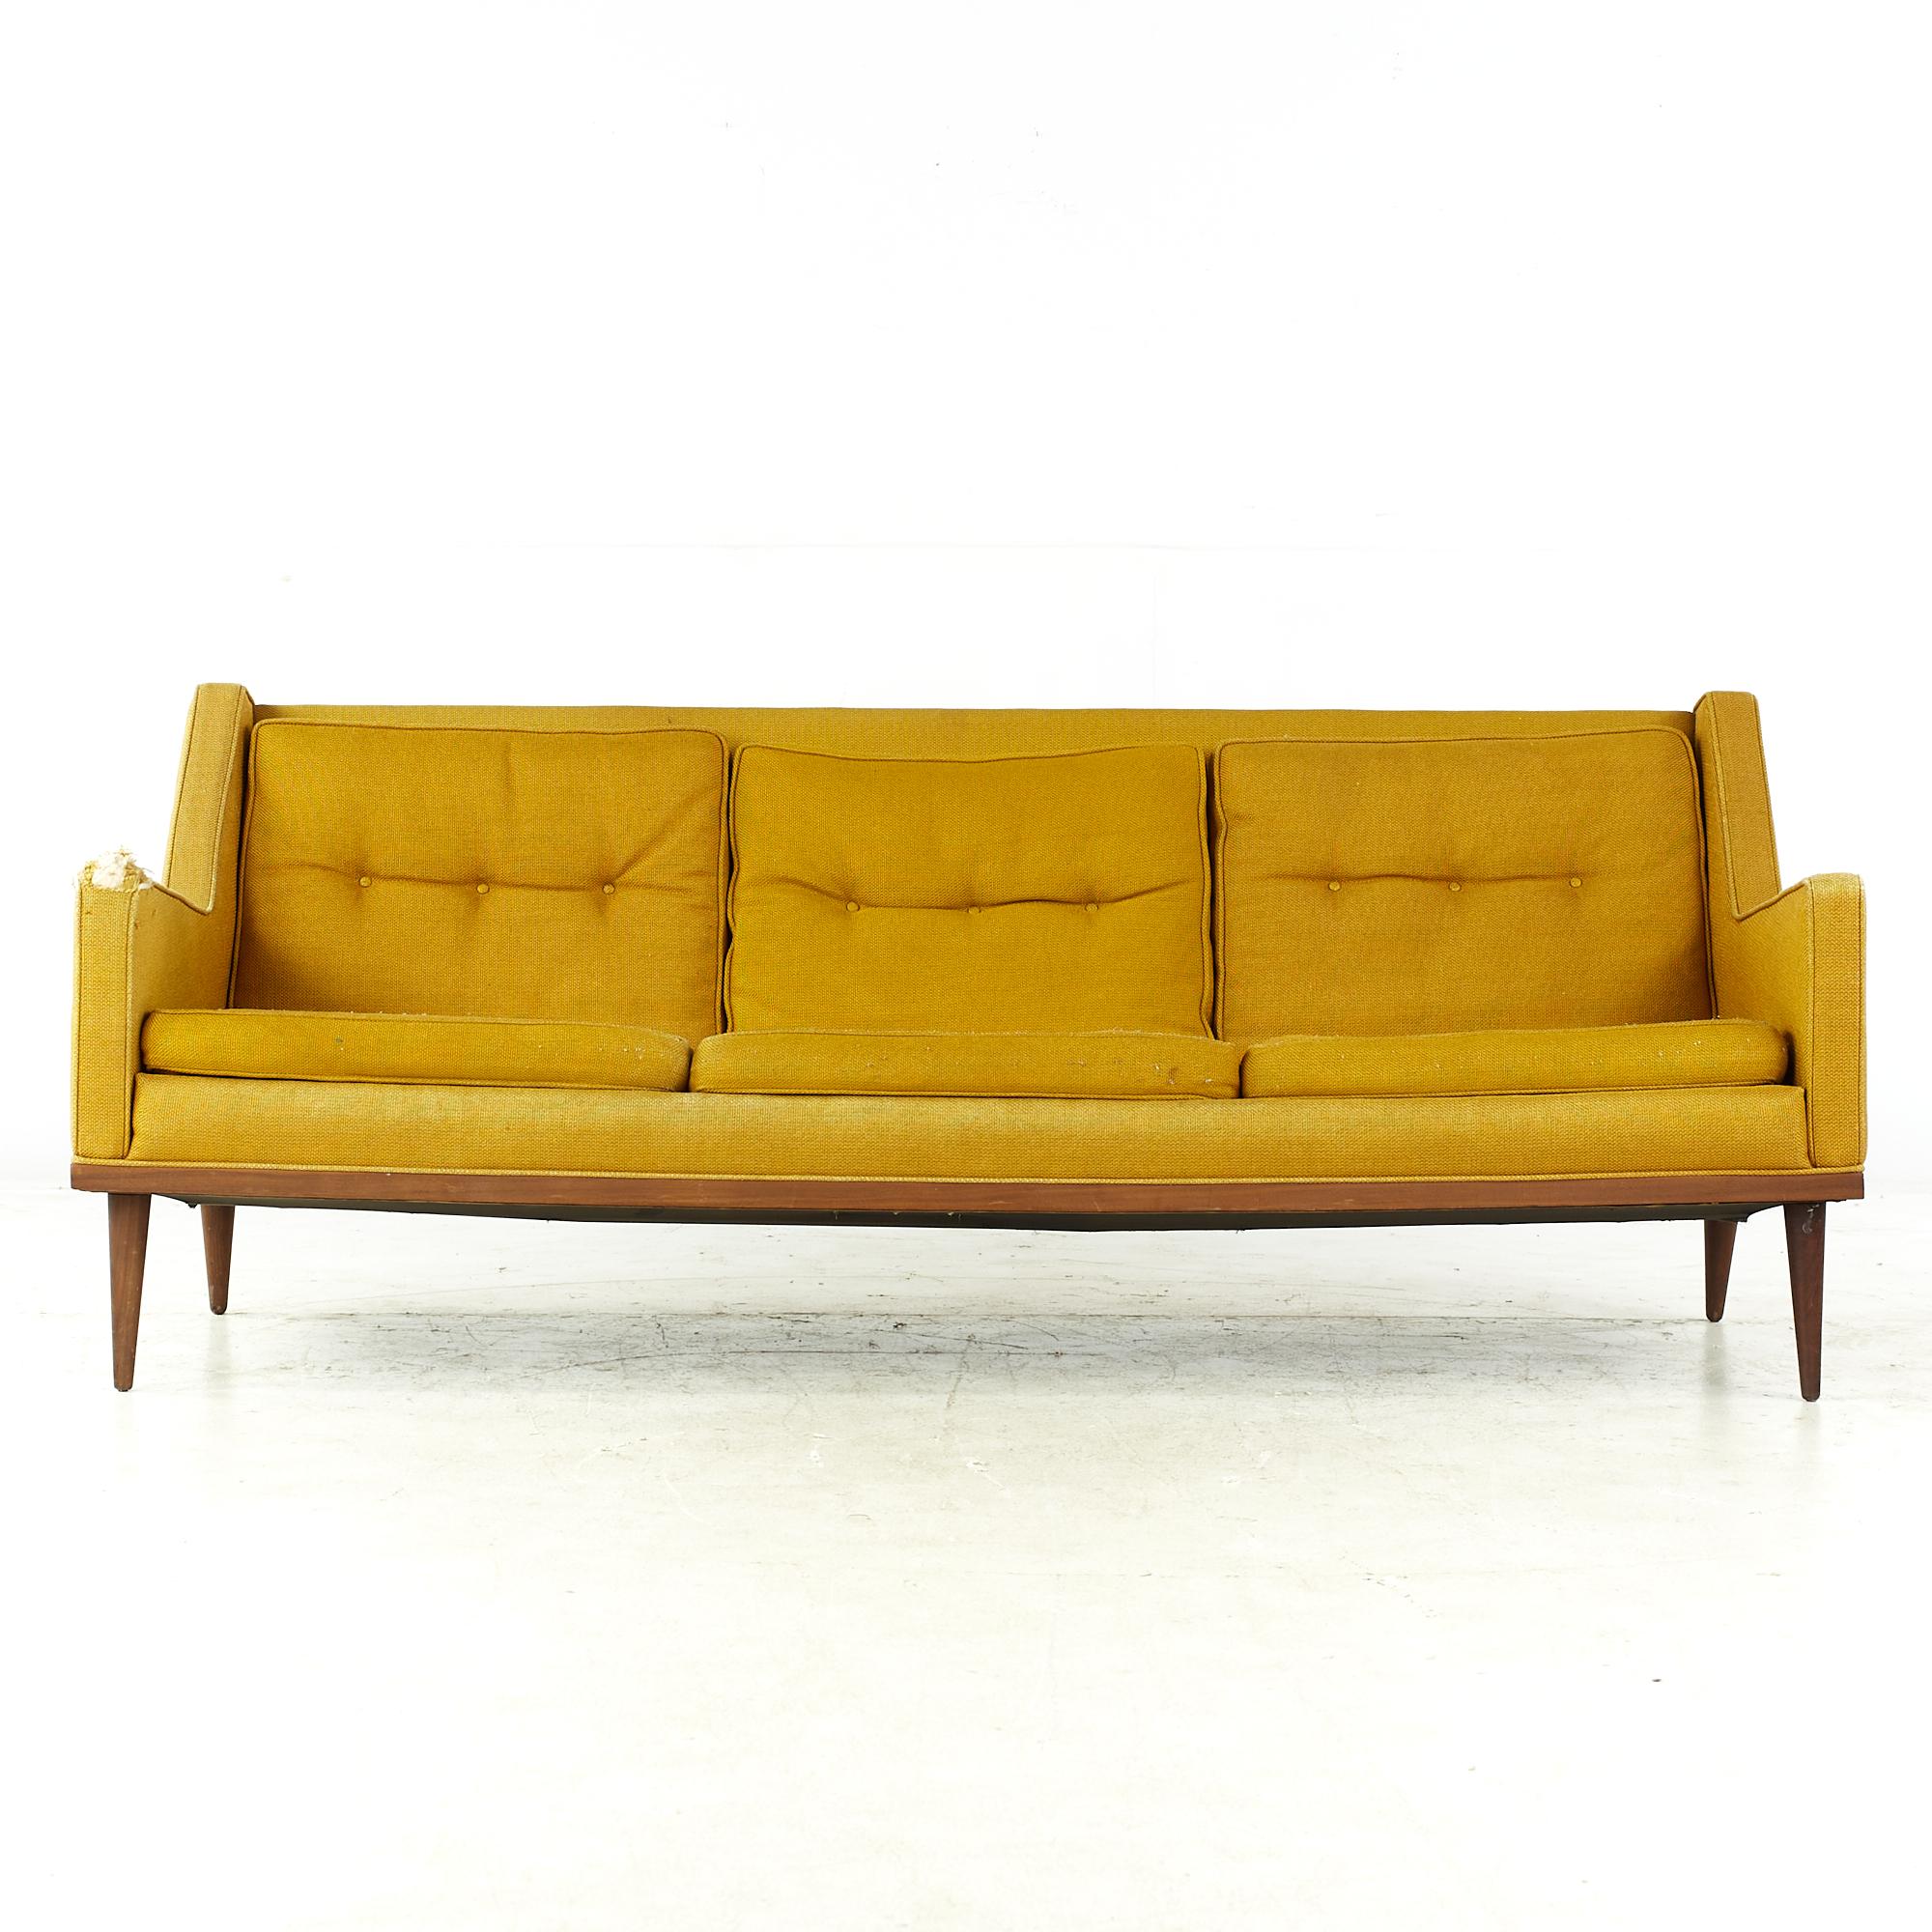 Milo Baughman for James Inc midcentury walnut sofa

This sofa measures: 70 wide x 31 deep x 28.5 inches high, with a seat height of 14.75 and arm height of 21 inches

All pieces of furniture can be had in what we call restored vintage condition.